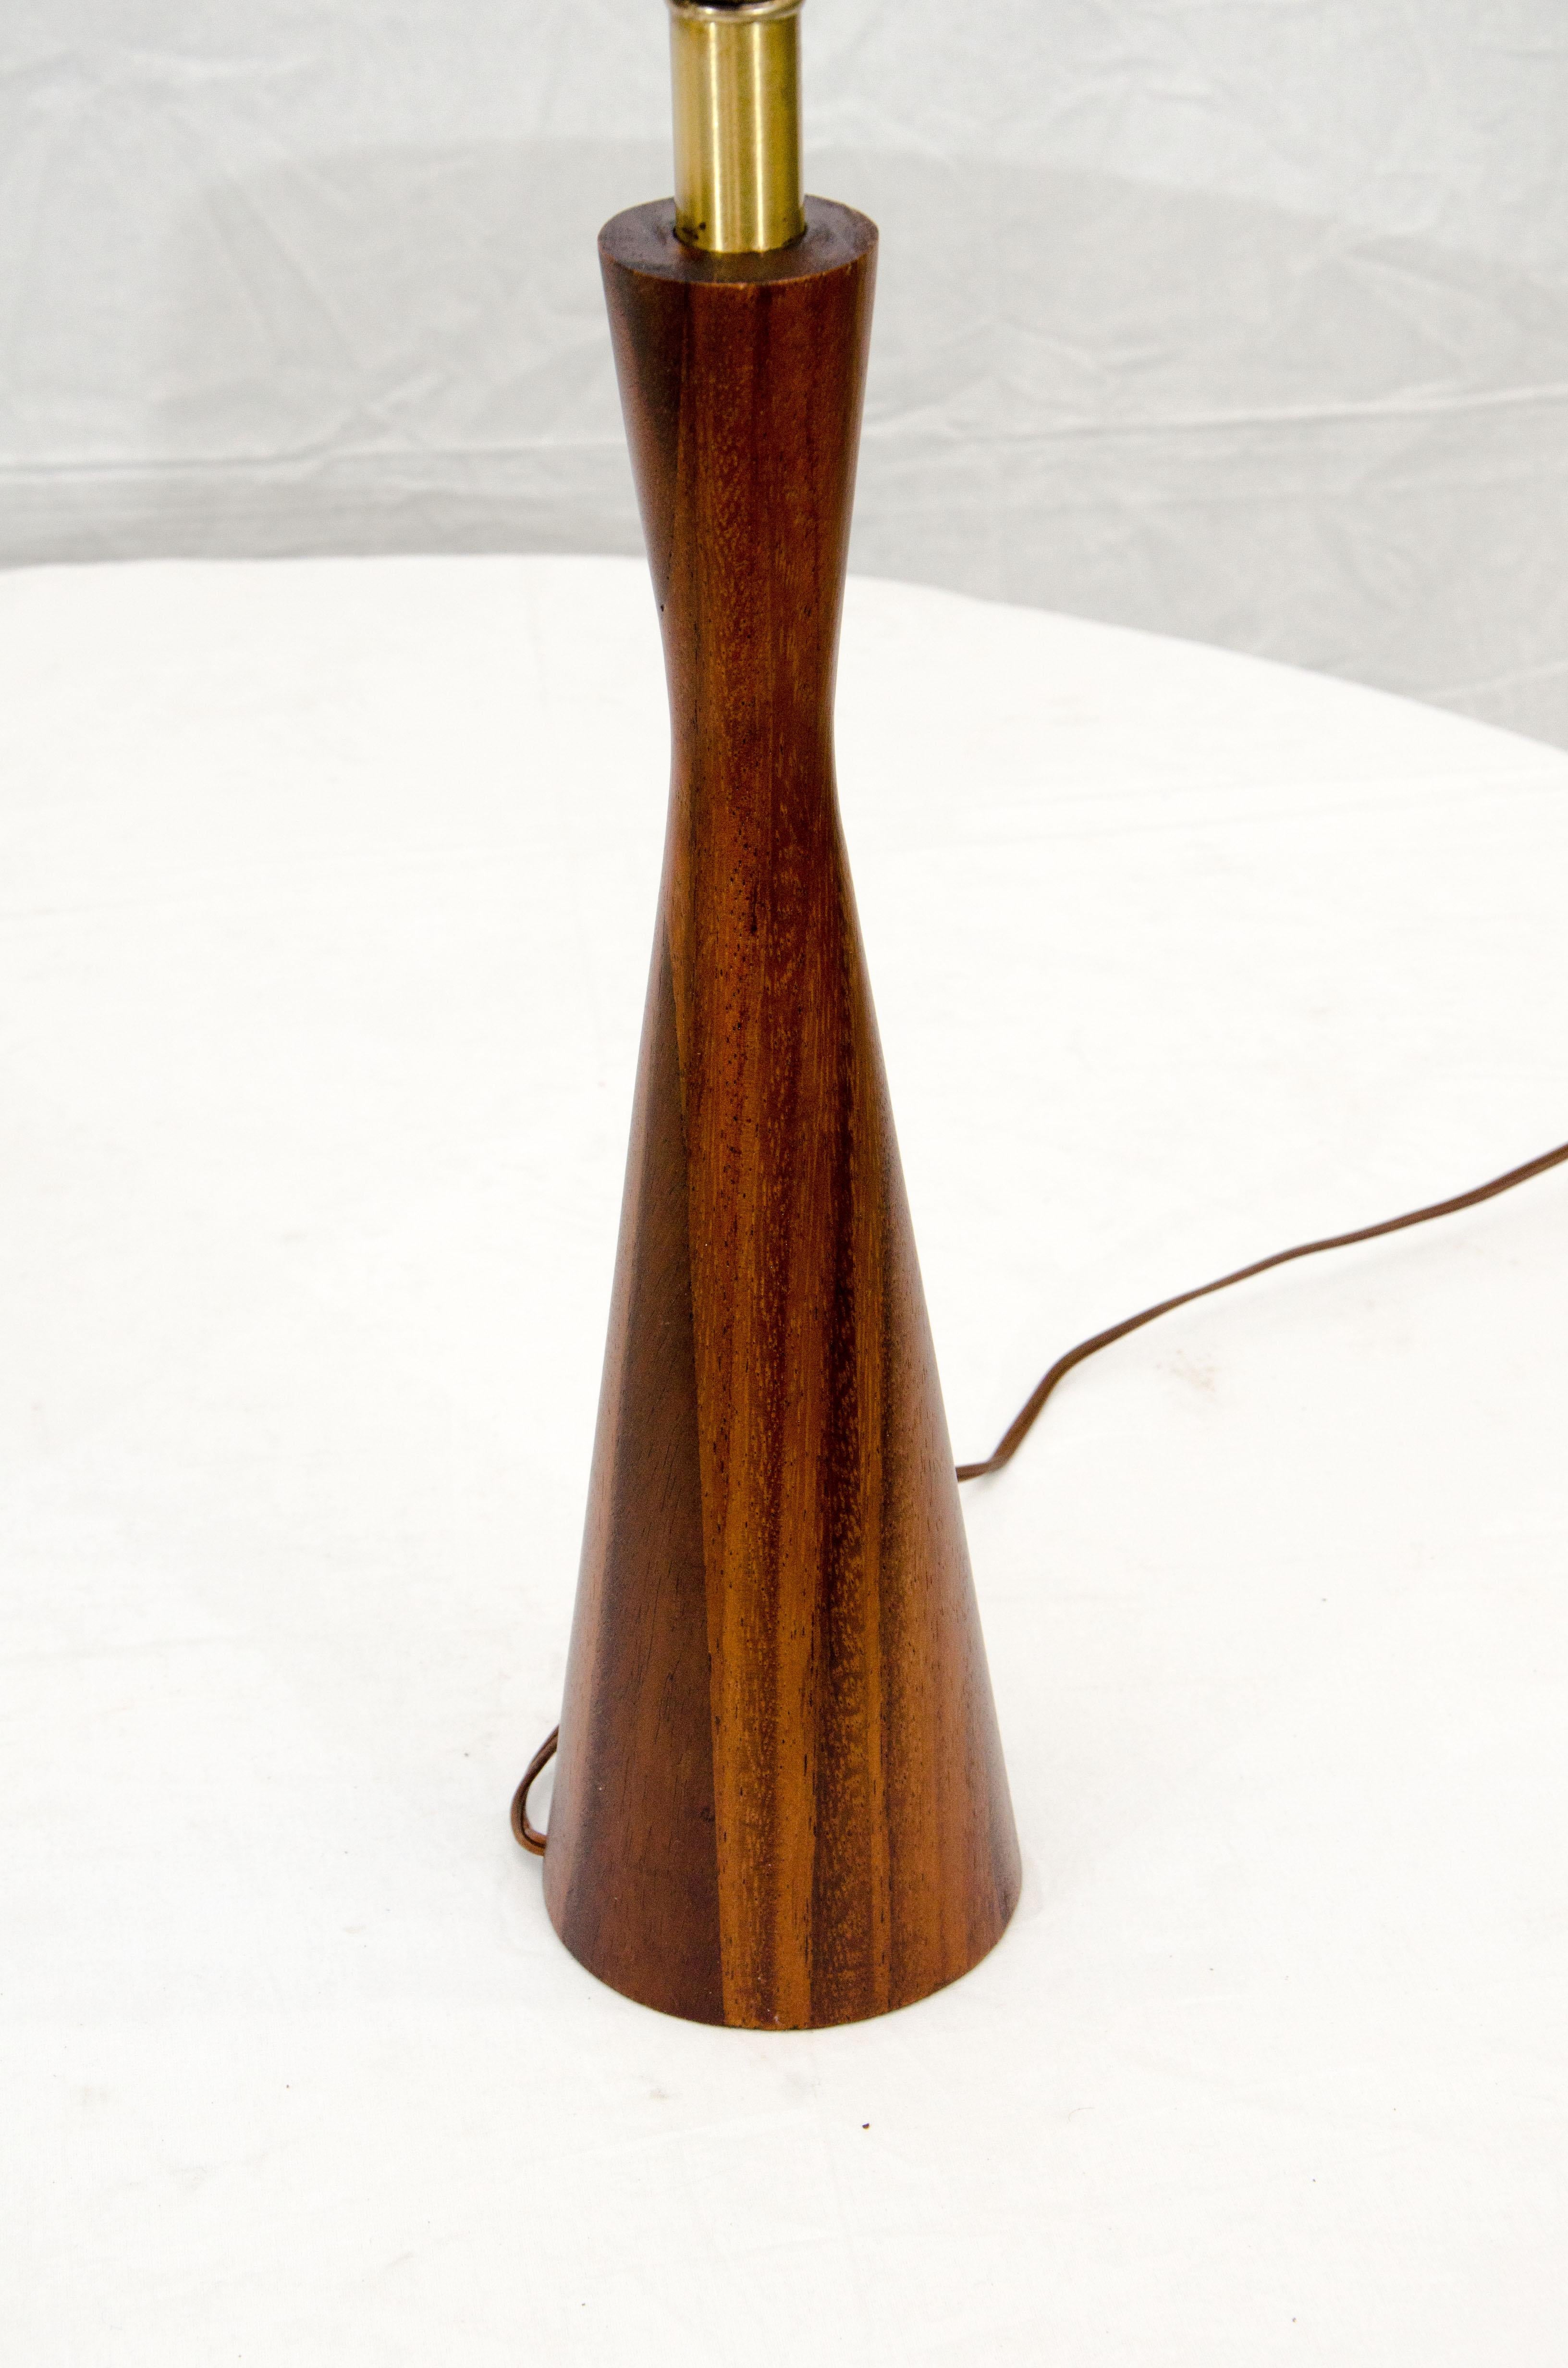 Mahogany Table Lamp In Good Condition For Sale In Crockett, CA